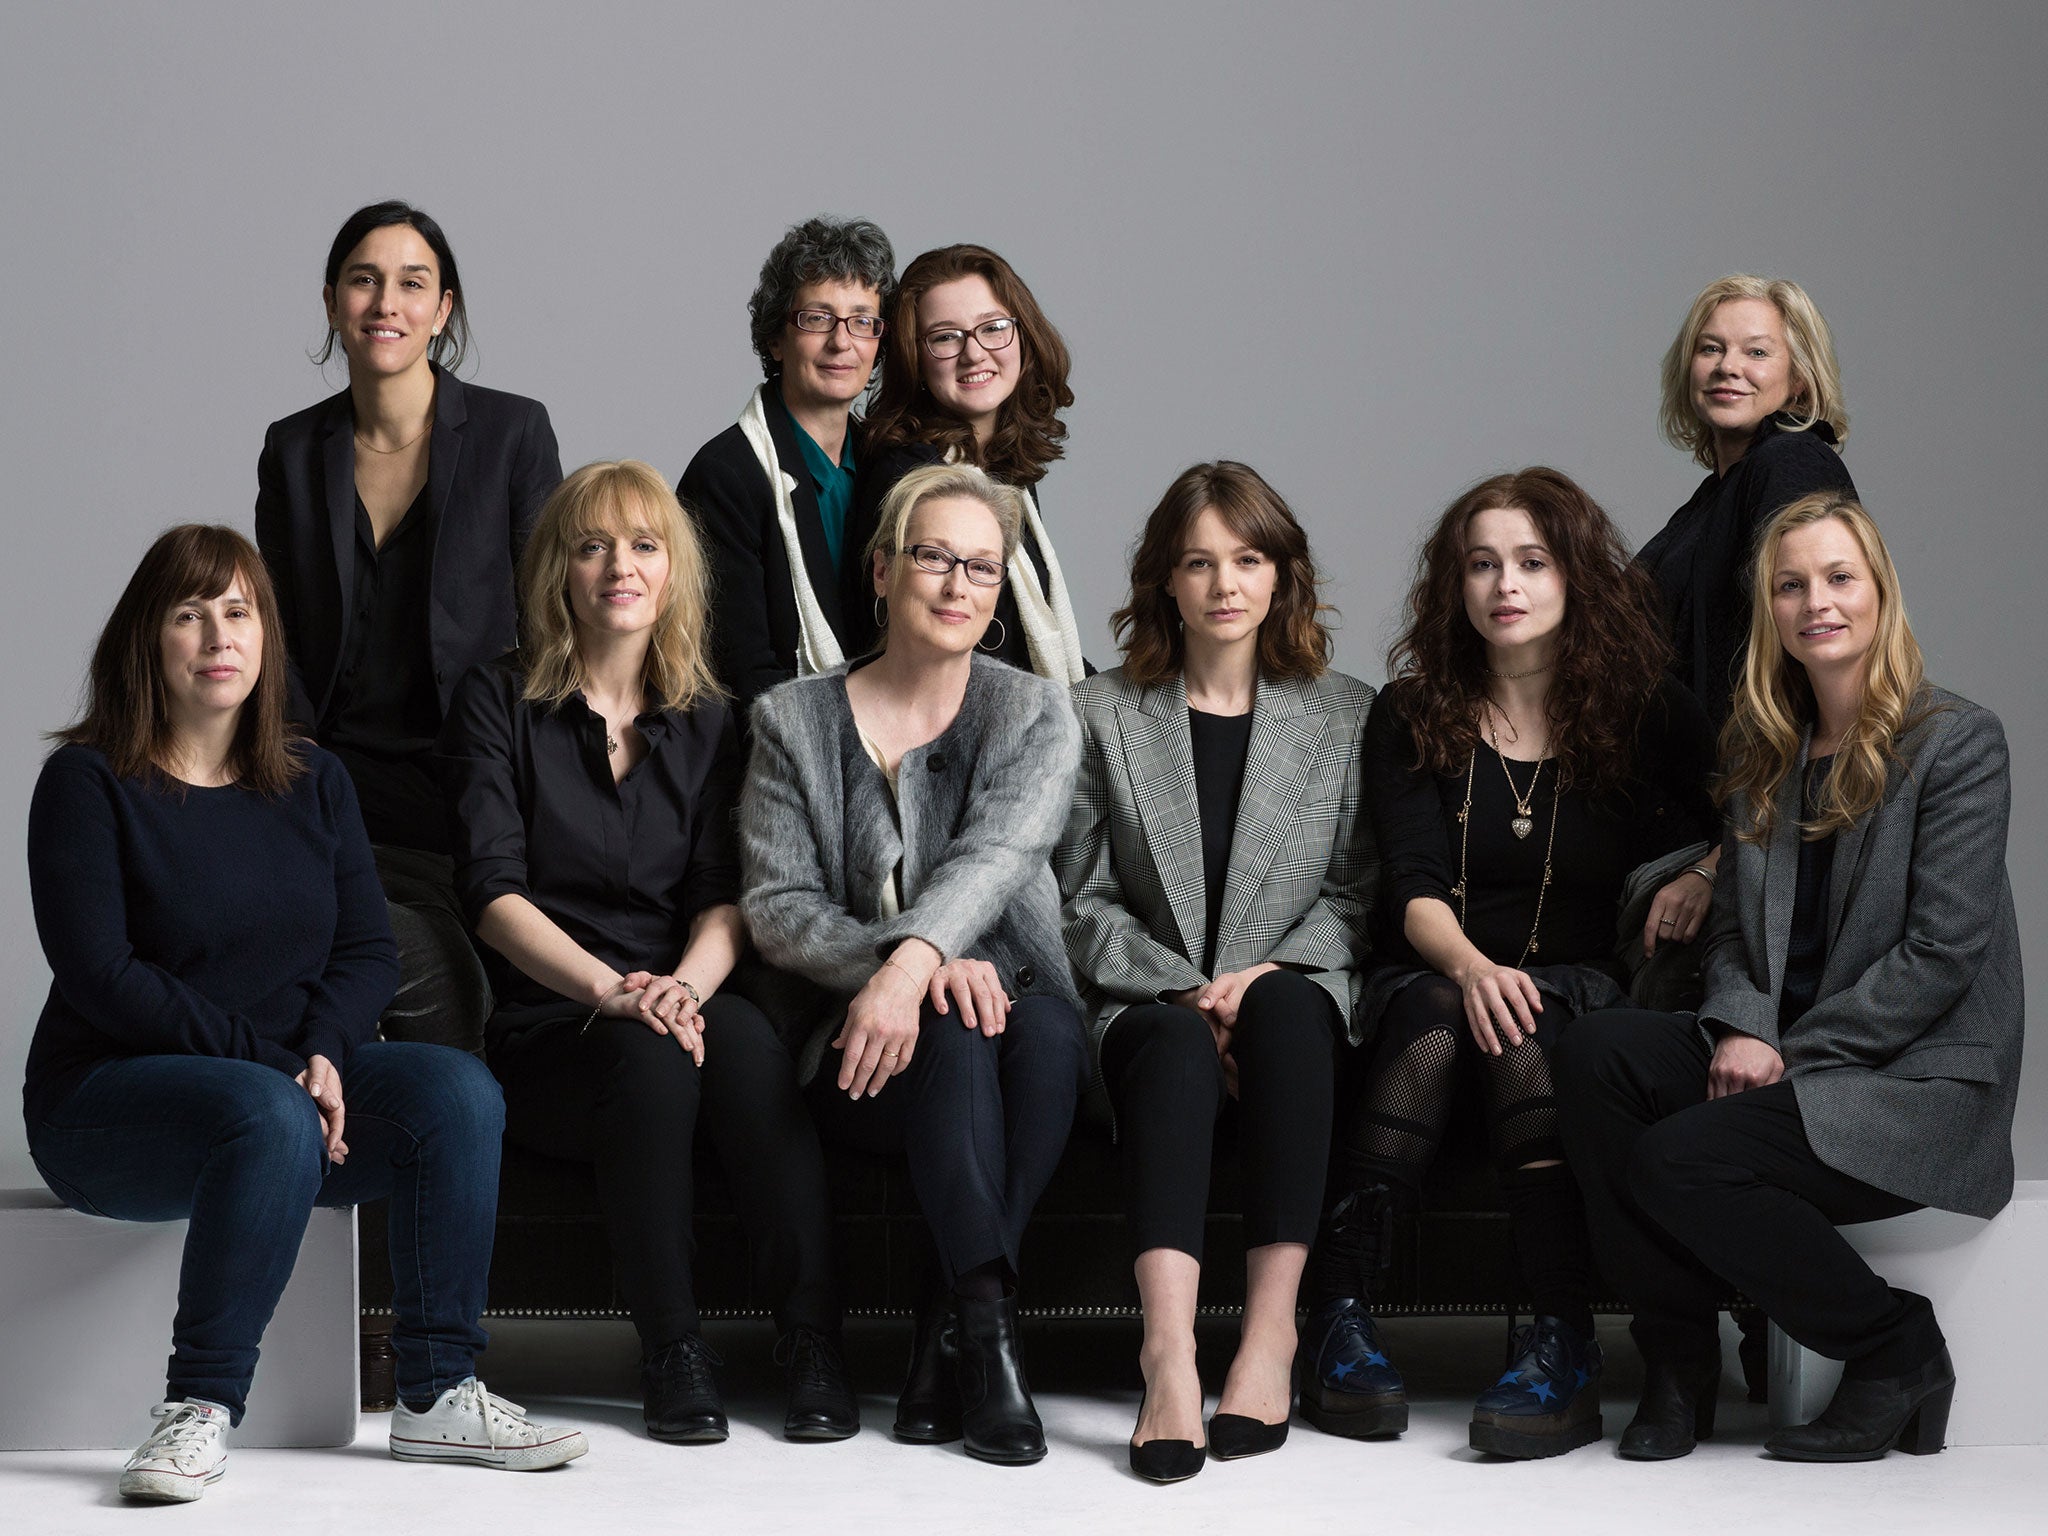 The women behind Suffragette pose to celebrate International Women's Day